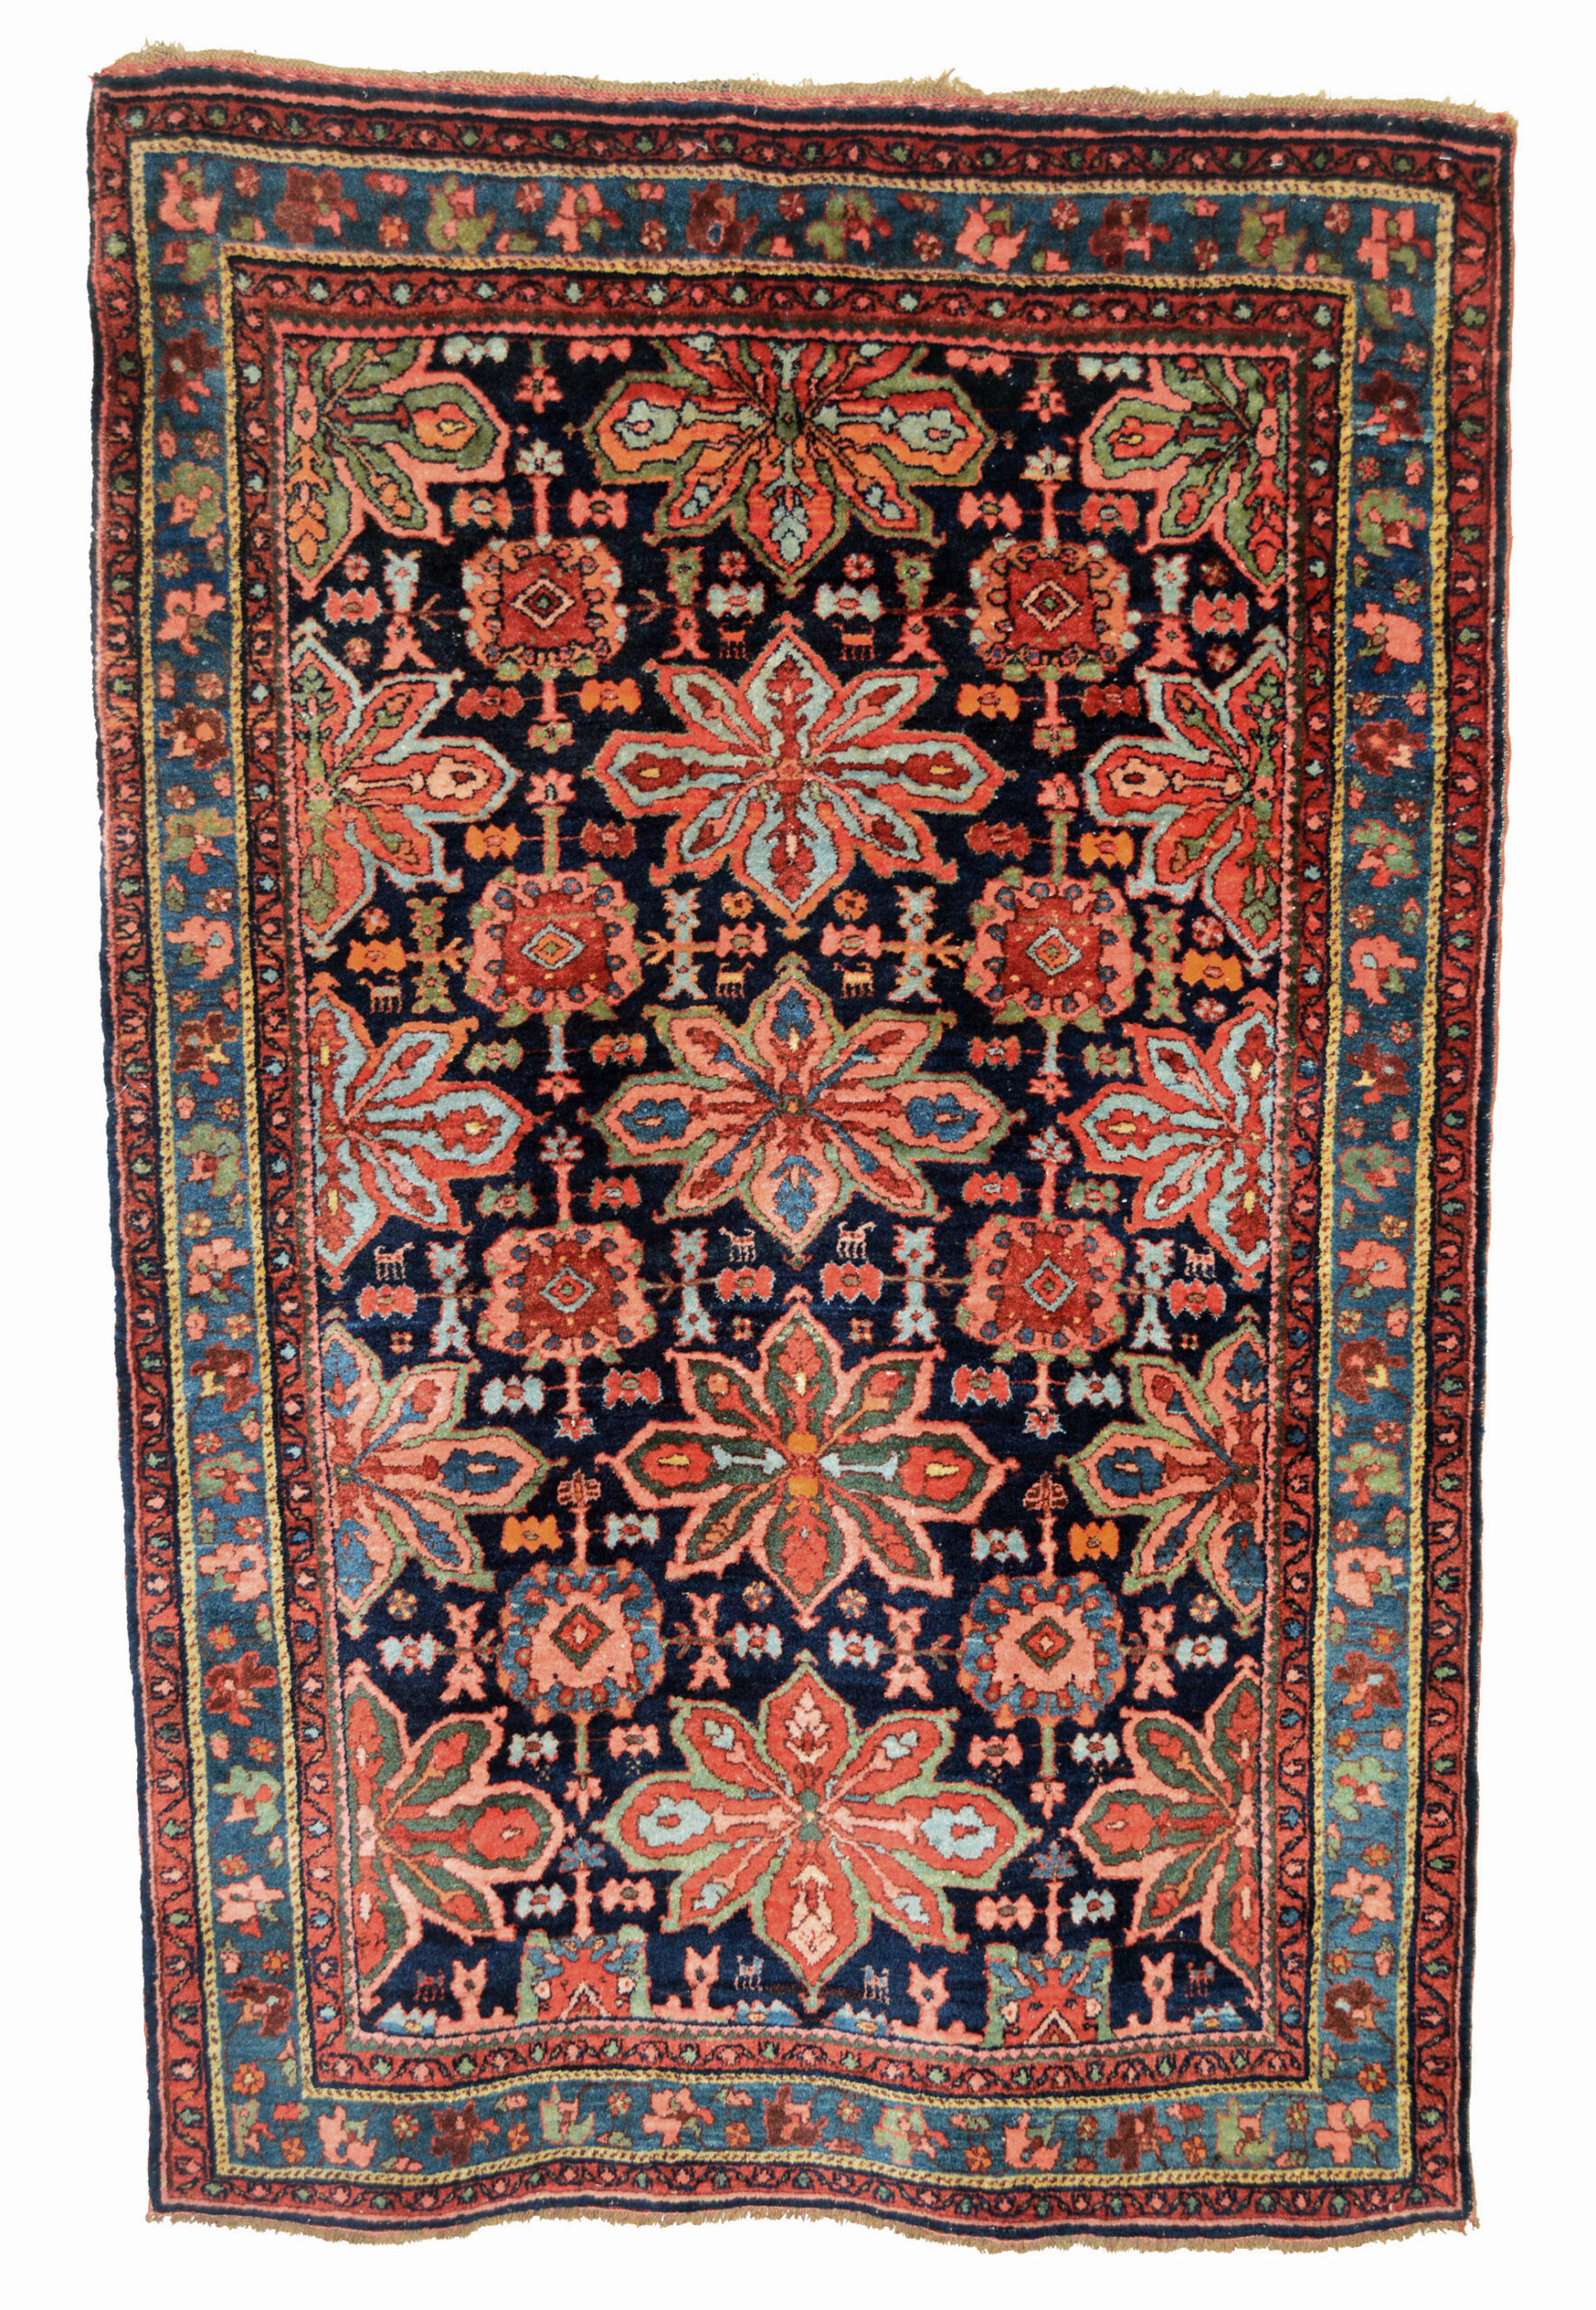 An antique northwest Persian Kurdish rug from the Bidjar area with the heavy weight characteristic of rugs from this region. The navy blue field is decorated with an all-over design of large large, multi color eight point stylized flowers and ancillary stylized floral elements and small, heavily stylized animals. A mid blue border frames the field. Douglas Stock Gallery is the Boston area's most selective dealer in antique Oriental rugs. Shop in historic South Natick, MA is located 5 minutes from Wellesley center and open by appointment Monday to Saturday.